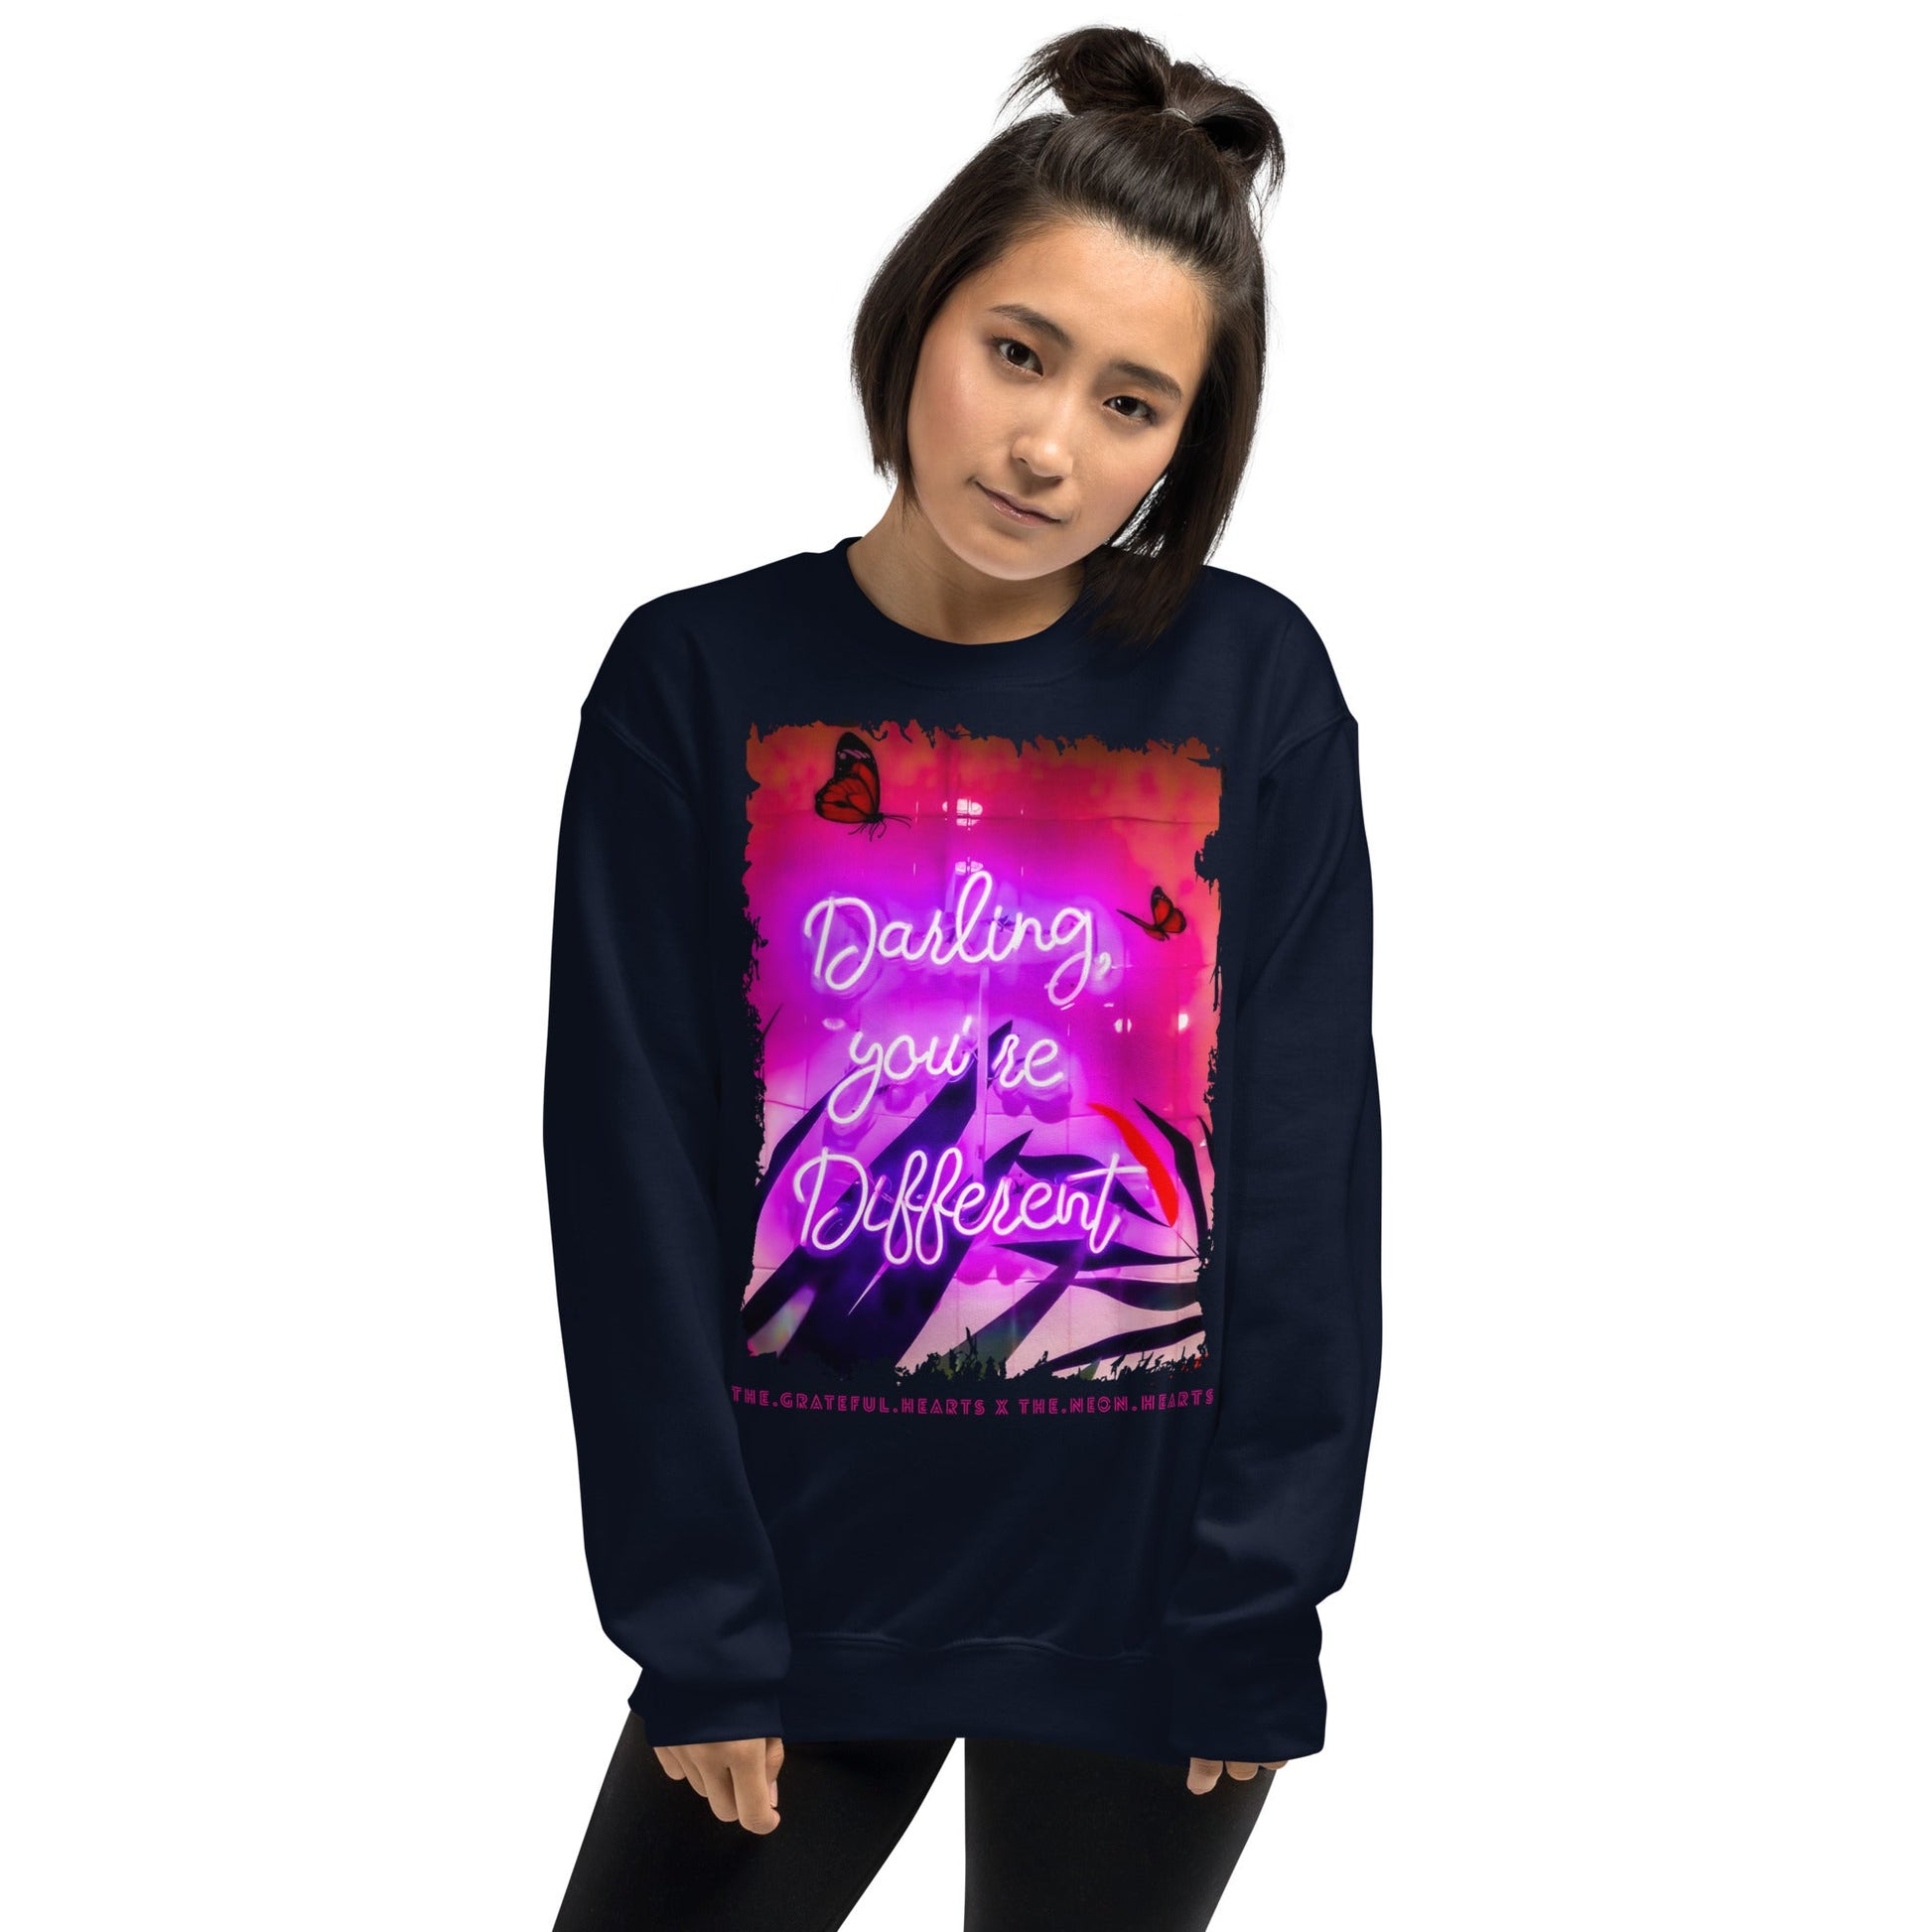 Darling You're Different ❤️ - Unisex Sweatshirt (Available in Various Colors 💖💙💜) - The Grateful Hearts